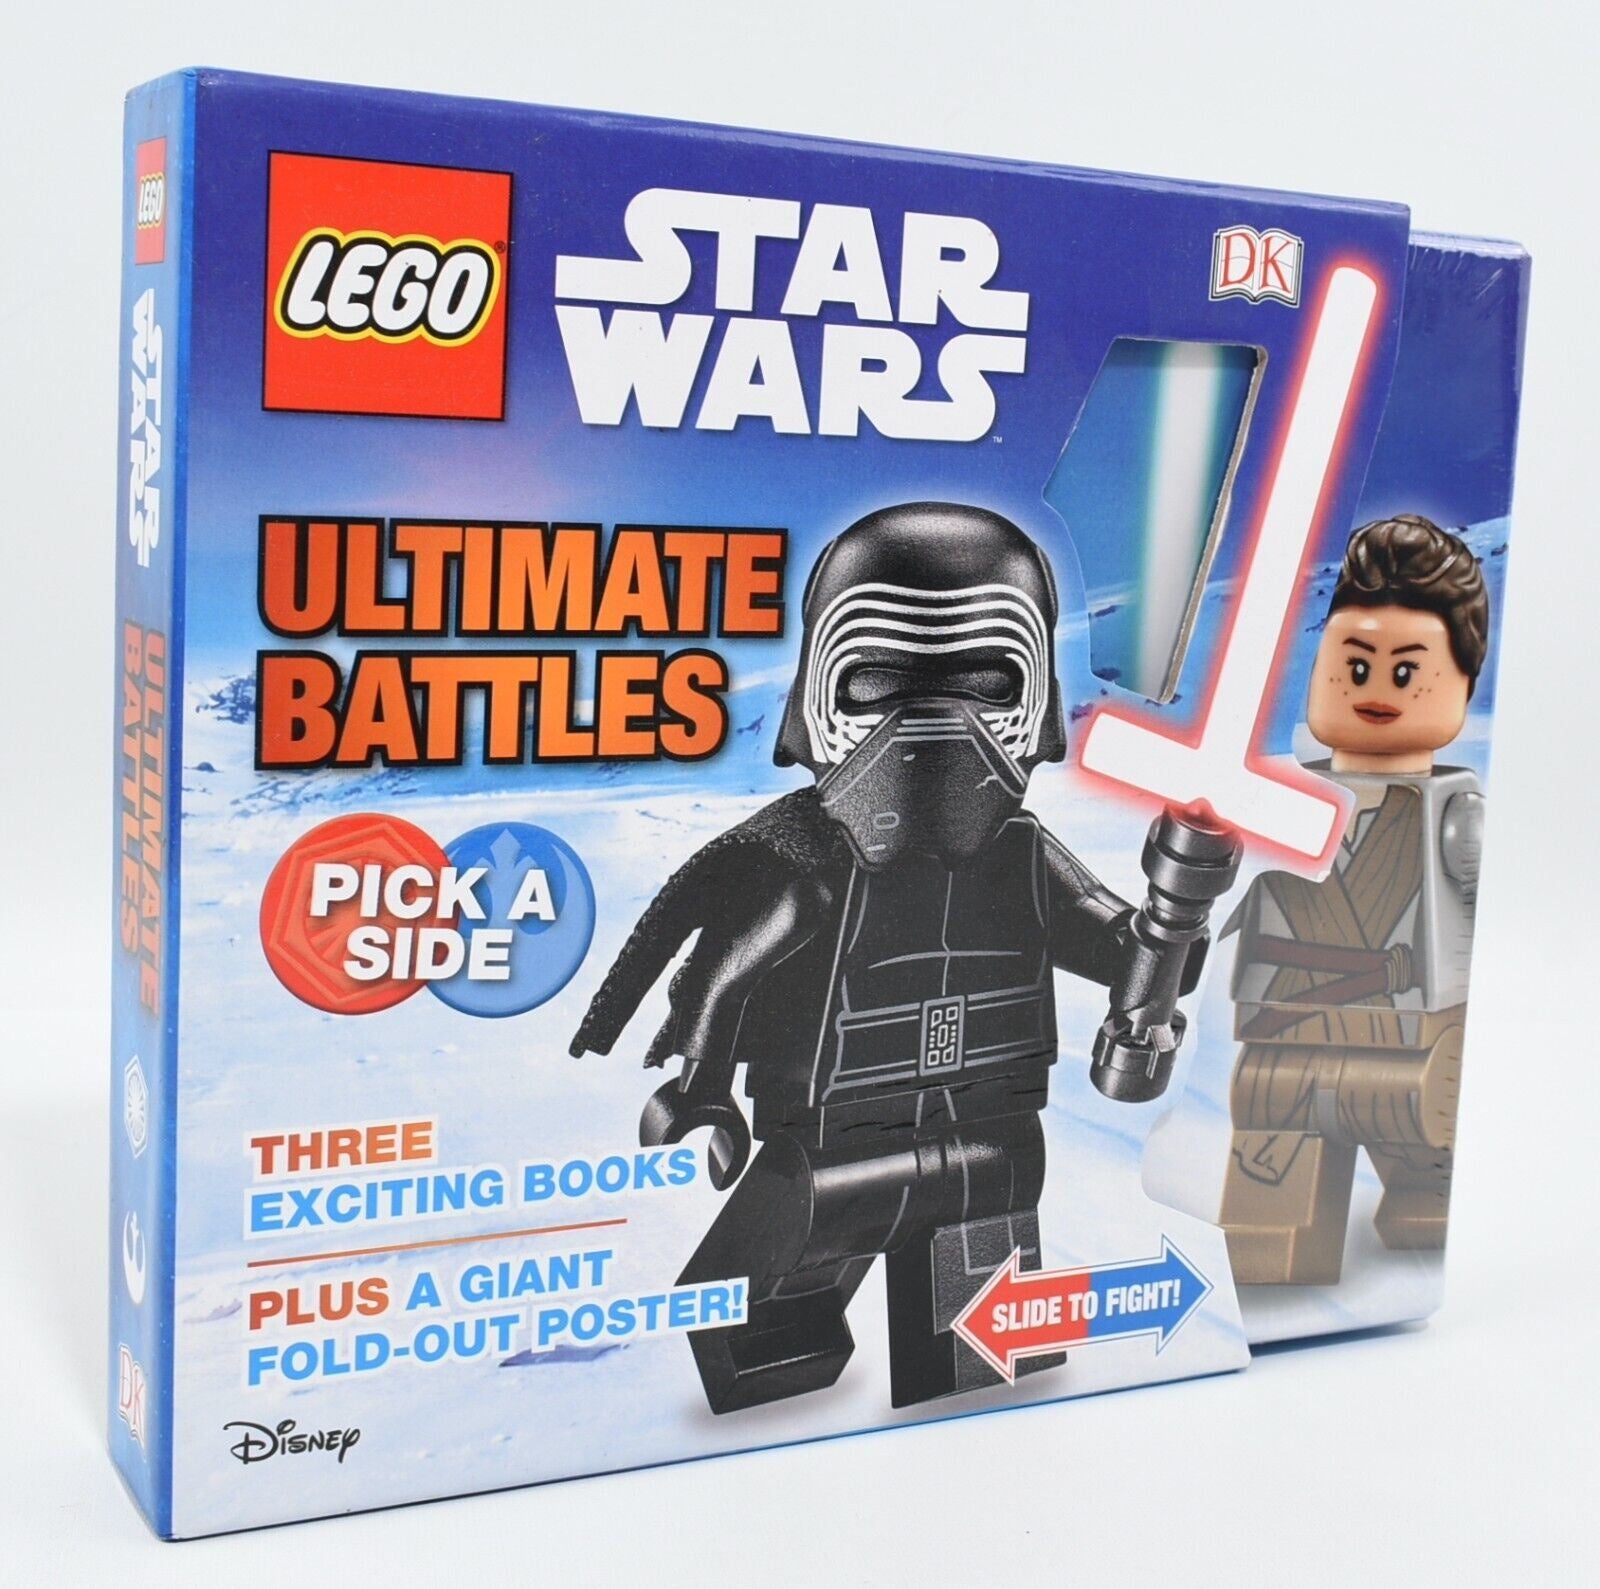 LEGO STAR WARS Ultimate Battles- Three Exciting Books Plus A Giant Poster